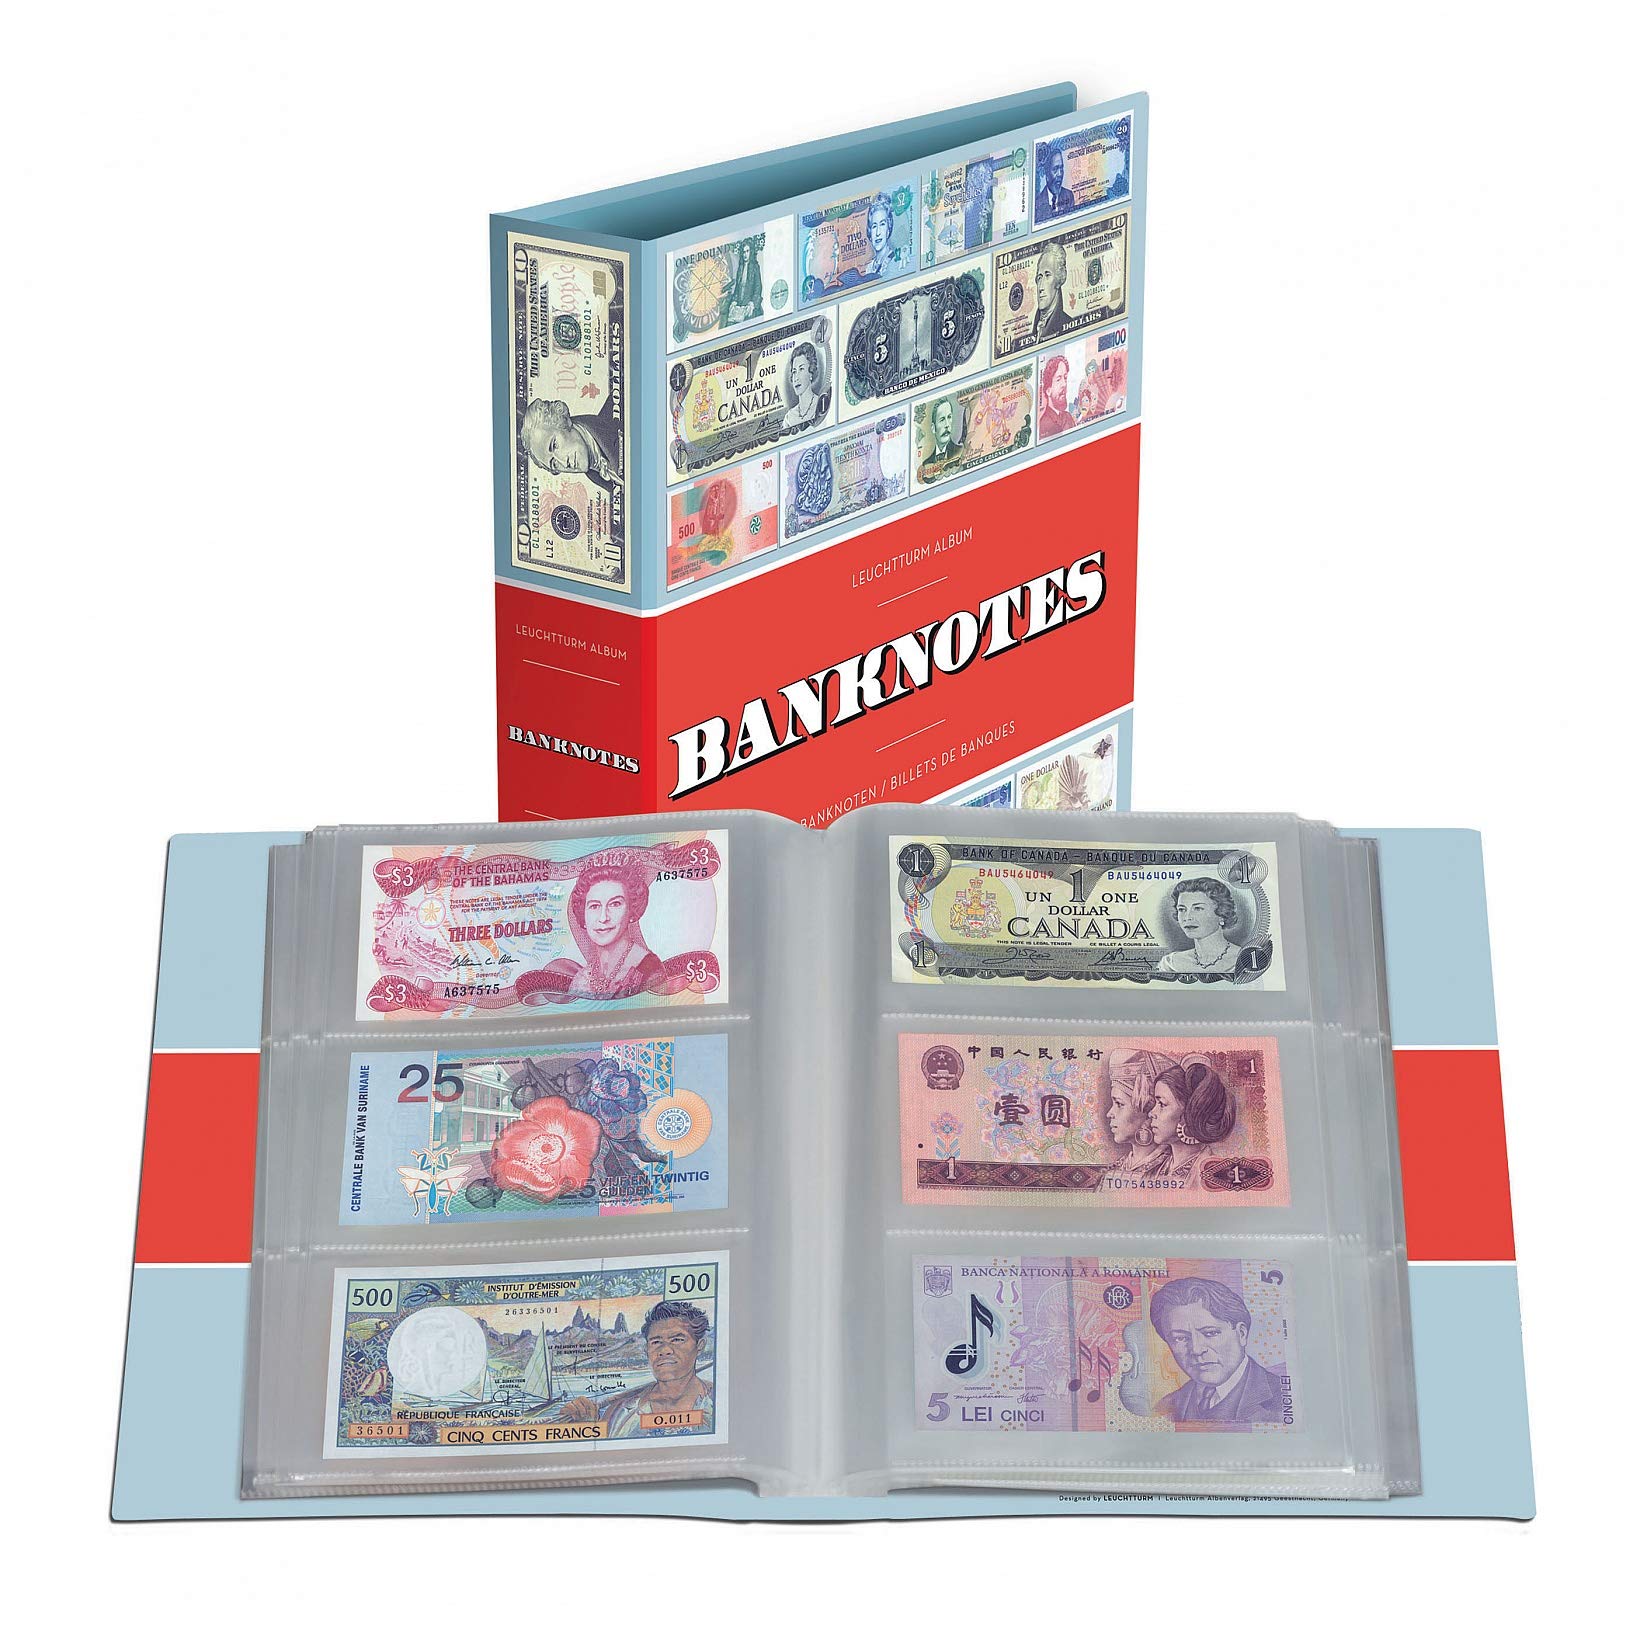 Lighthouse Album for 300 banknotes with 100 Bound Sheets - Colorful Decorative Cover